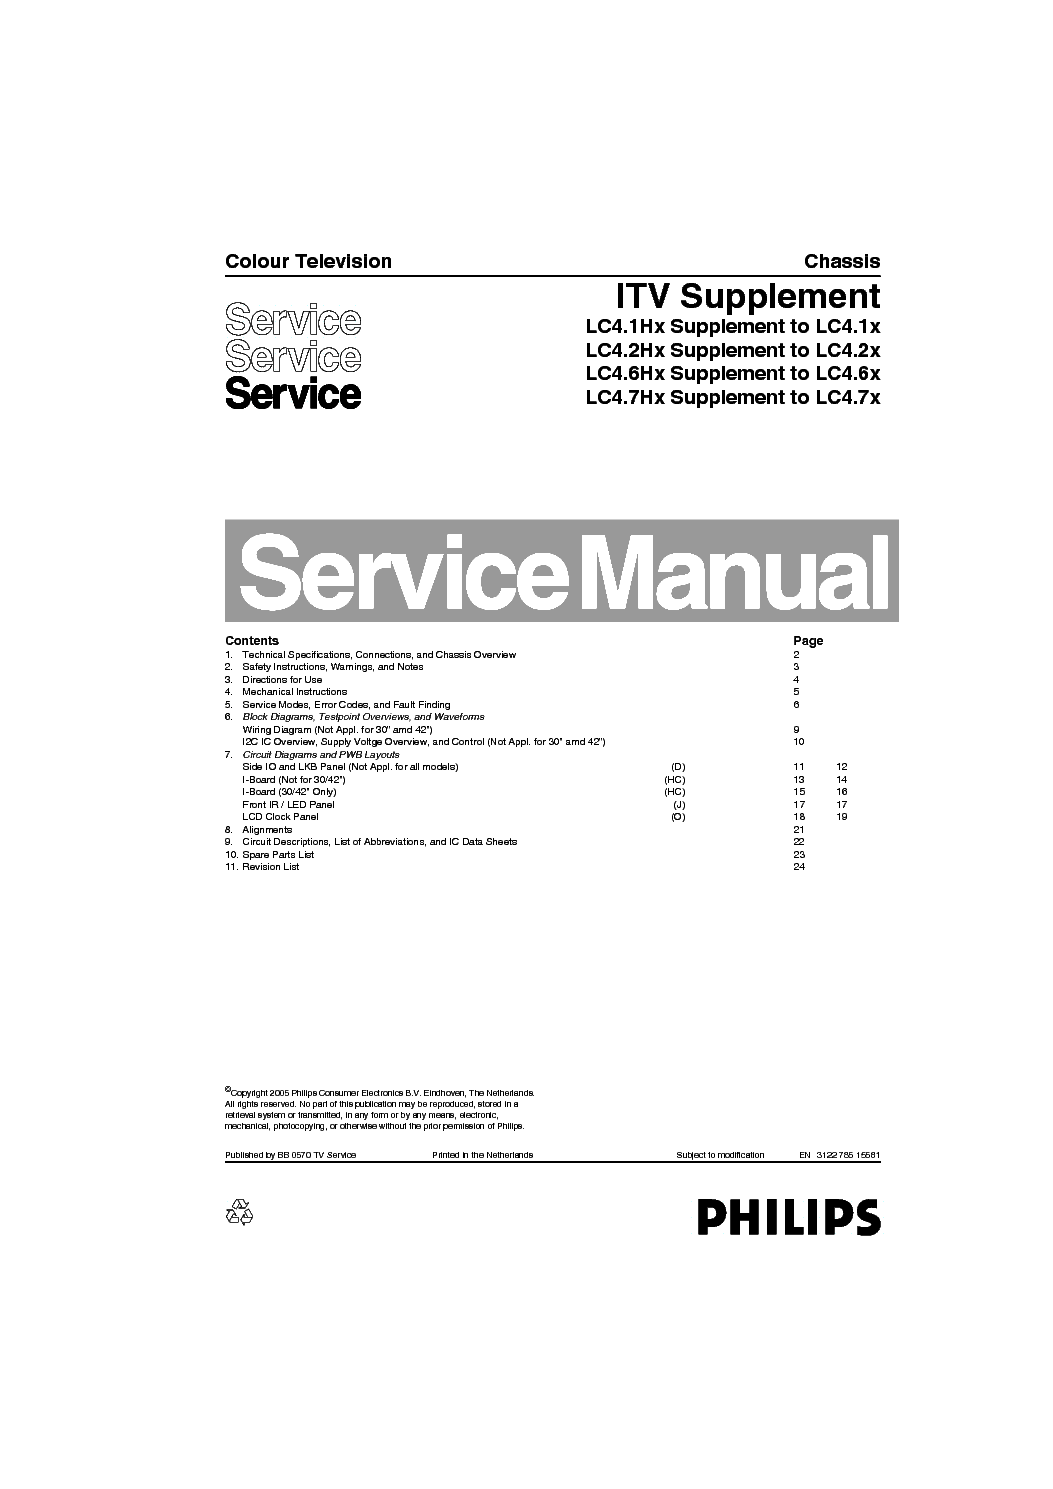 PHILIPS LC4.1 LC4.2 LC4.6 LC4.7 ITV-SUPPLEMENT 312278515581 service manual (1st page)